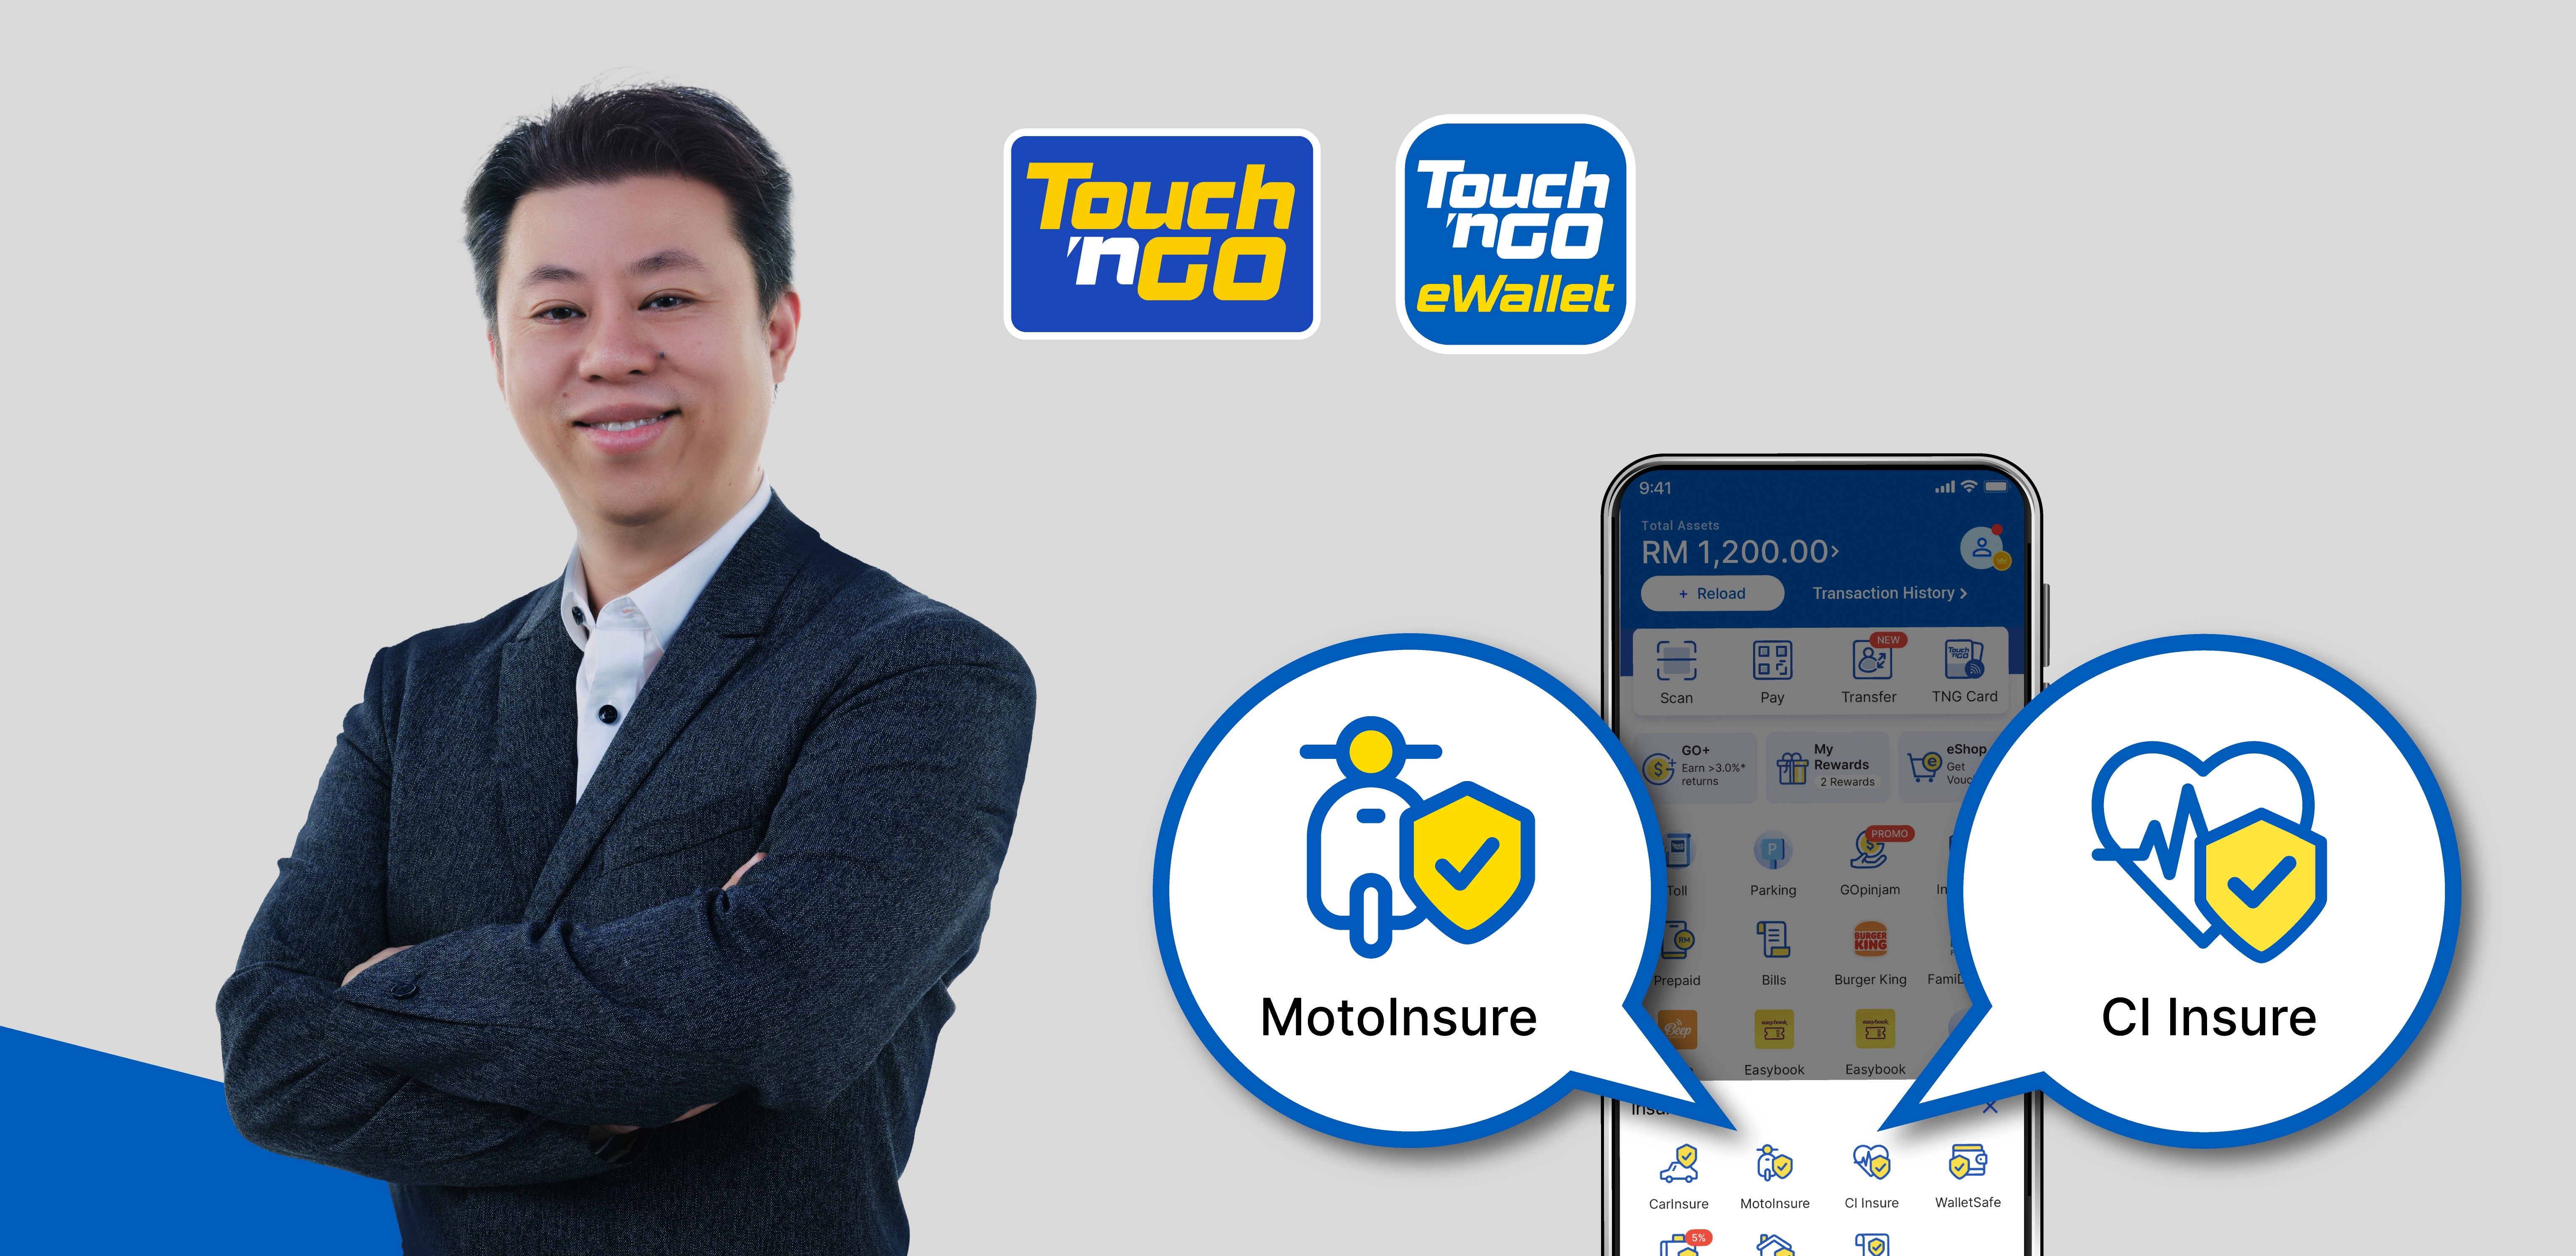 Touch ‘n Go eWallet Adds CI Insure and MotoInsure to its Latest Insurance Offerings